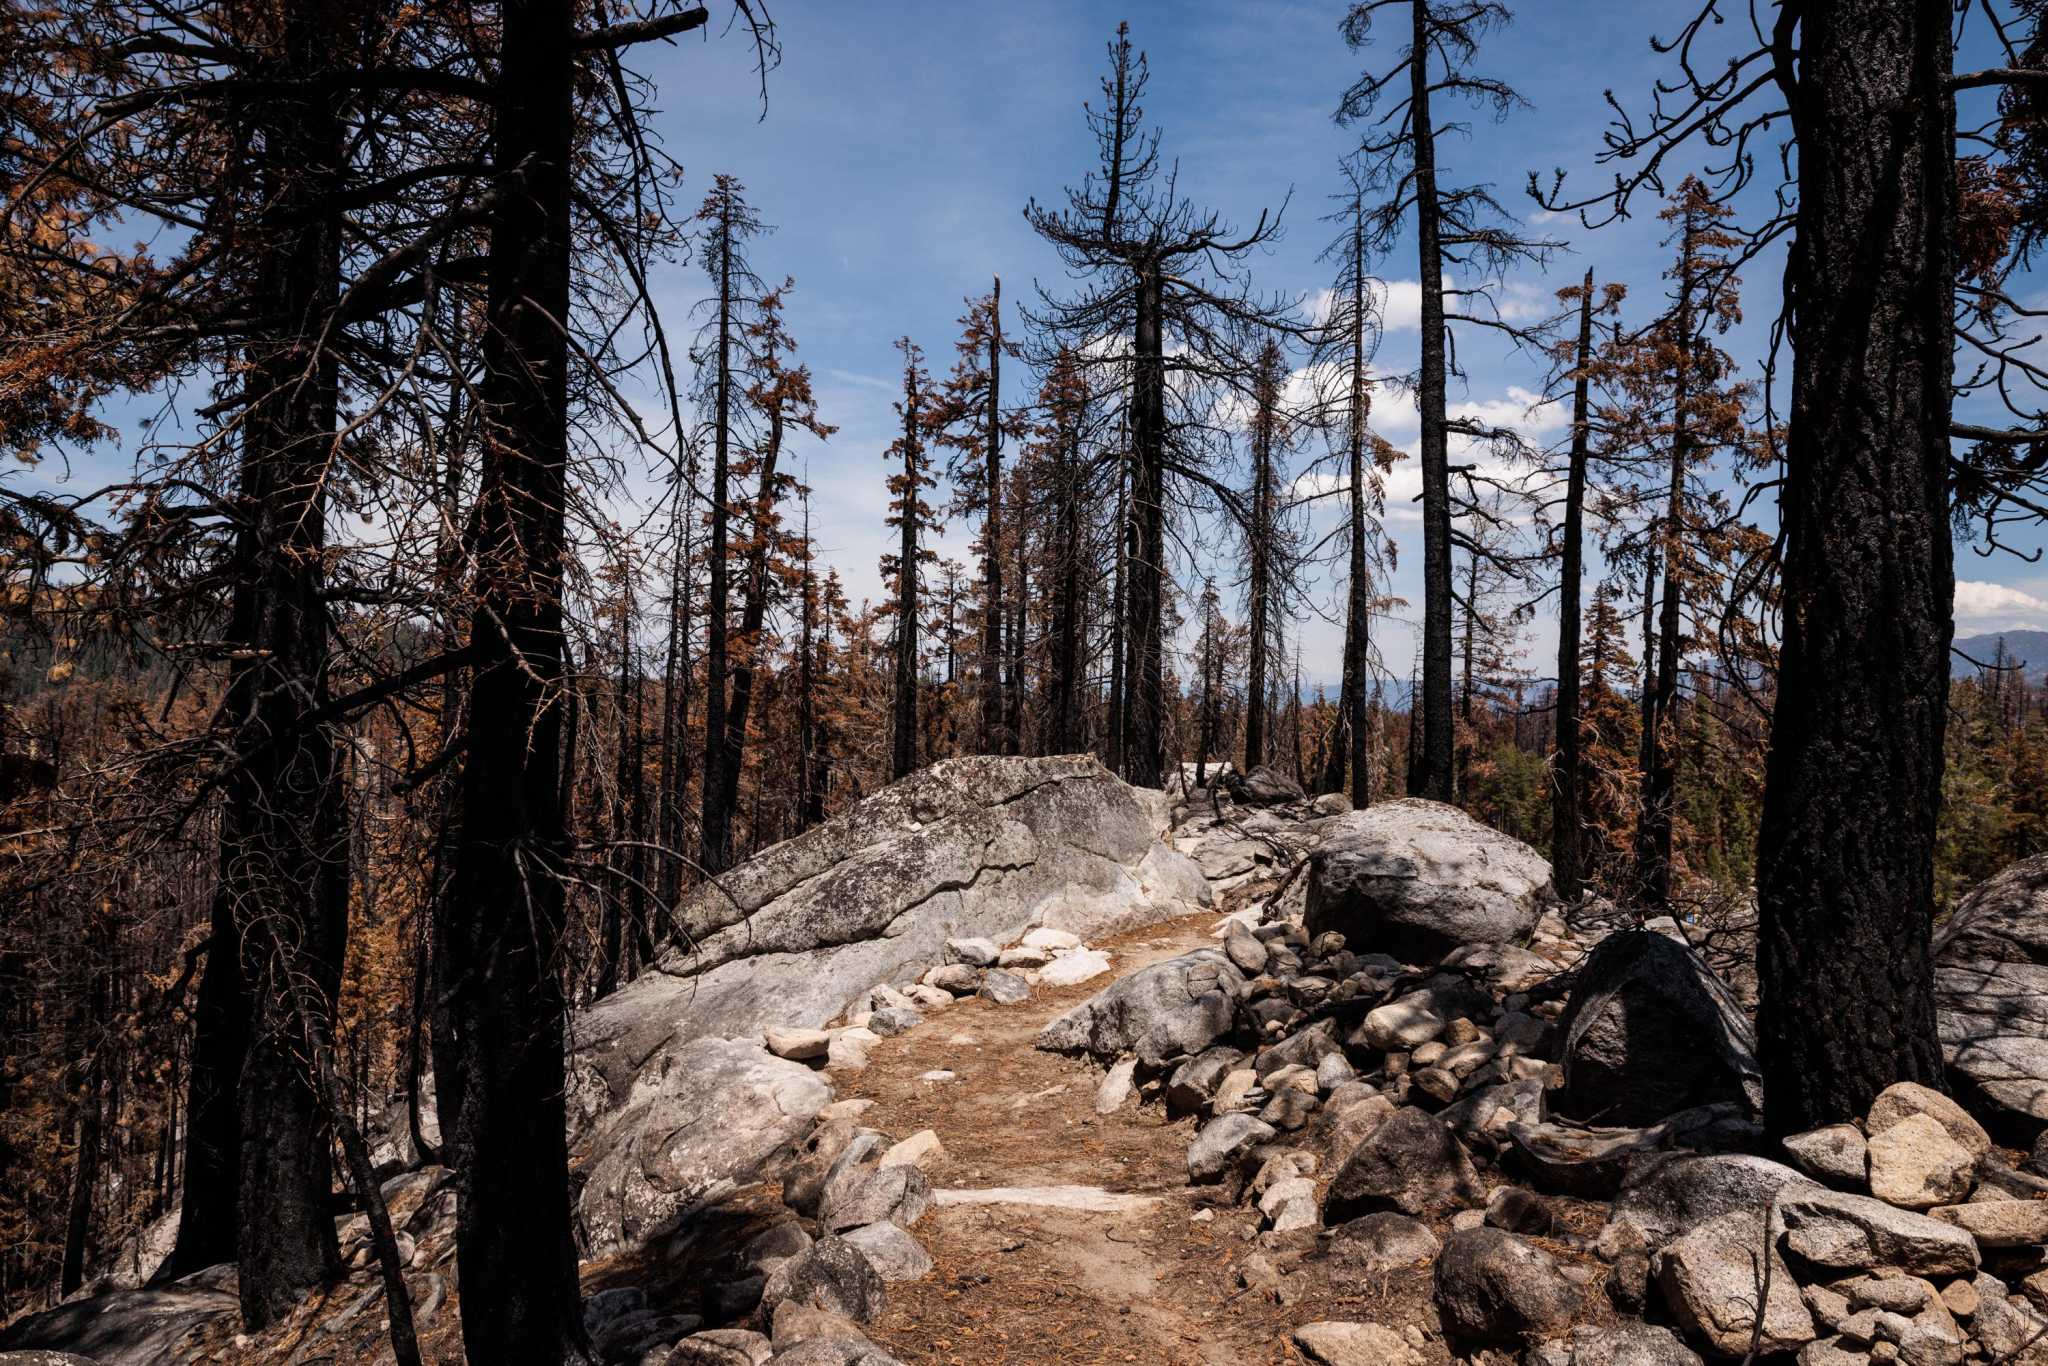 How the Pacific Crest Trail may ‘all but impossible’ to hike